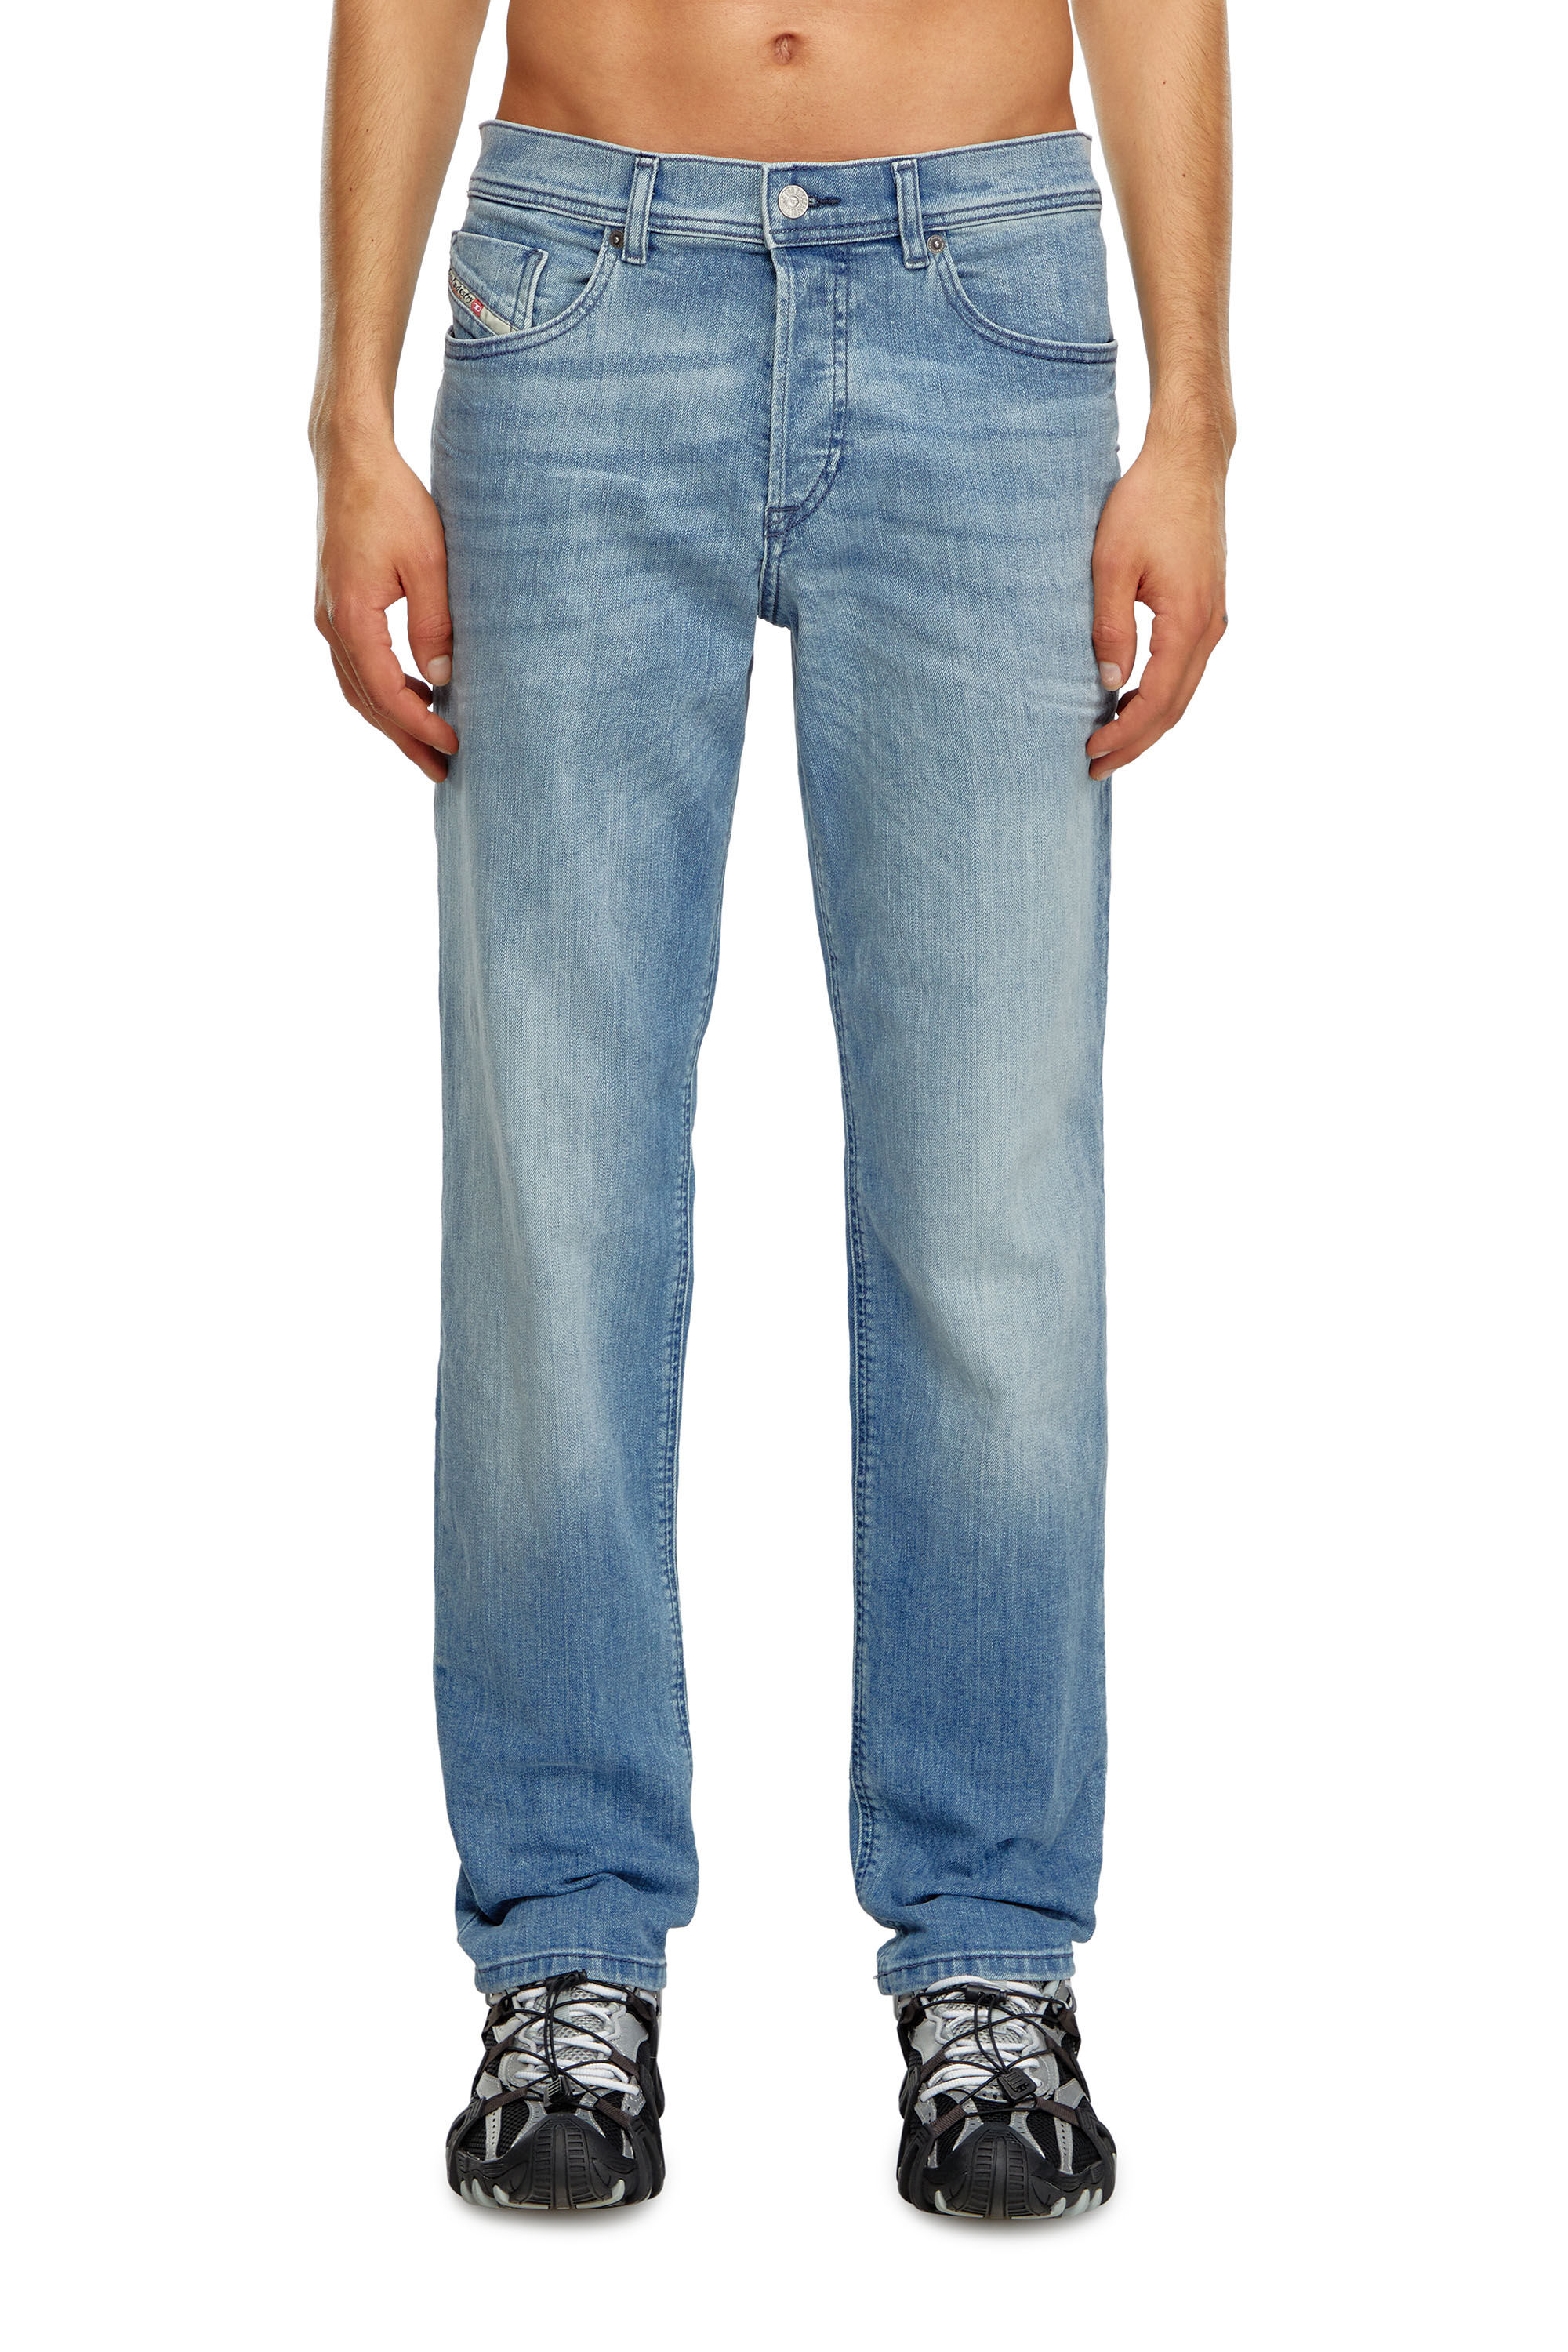 Diesel - Tapered Jeans 2023 D-Finitive 0GRDI, Hombre Tapered Jeans - 2023 D-Finitive in Azul marino - Image 3